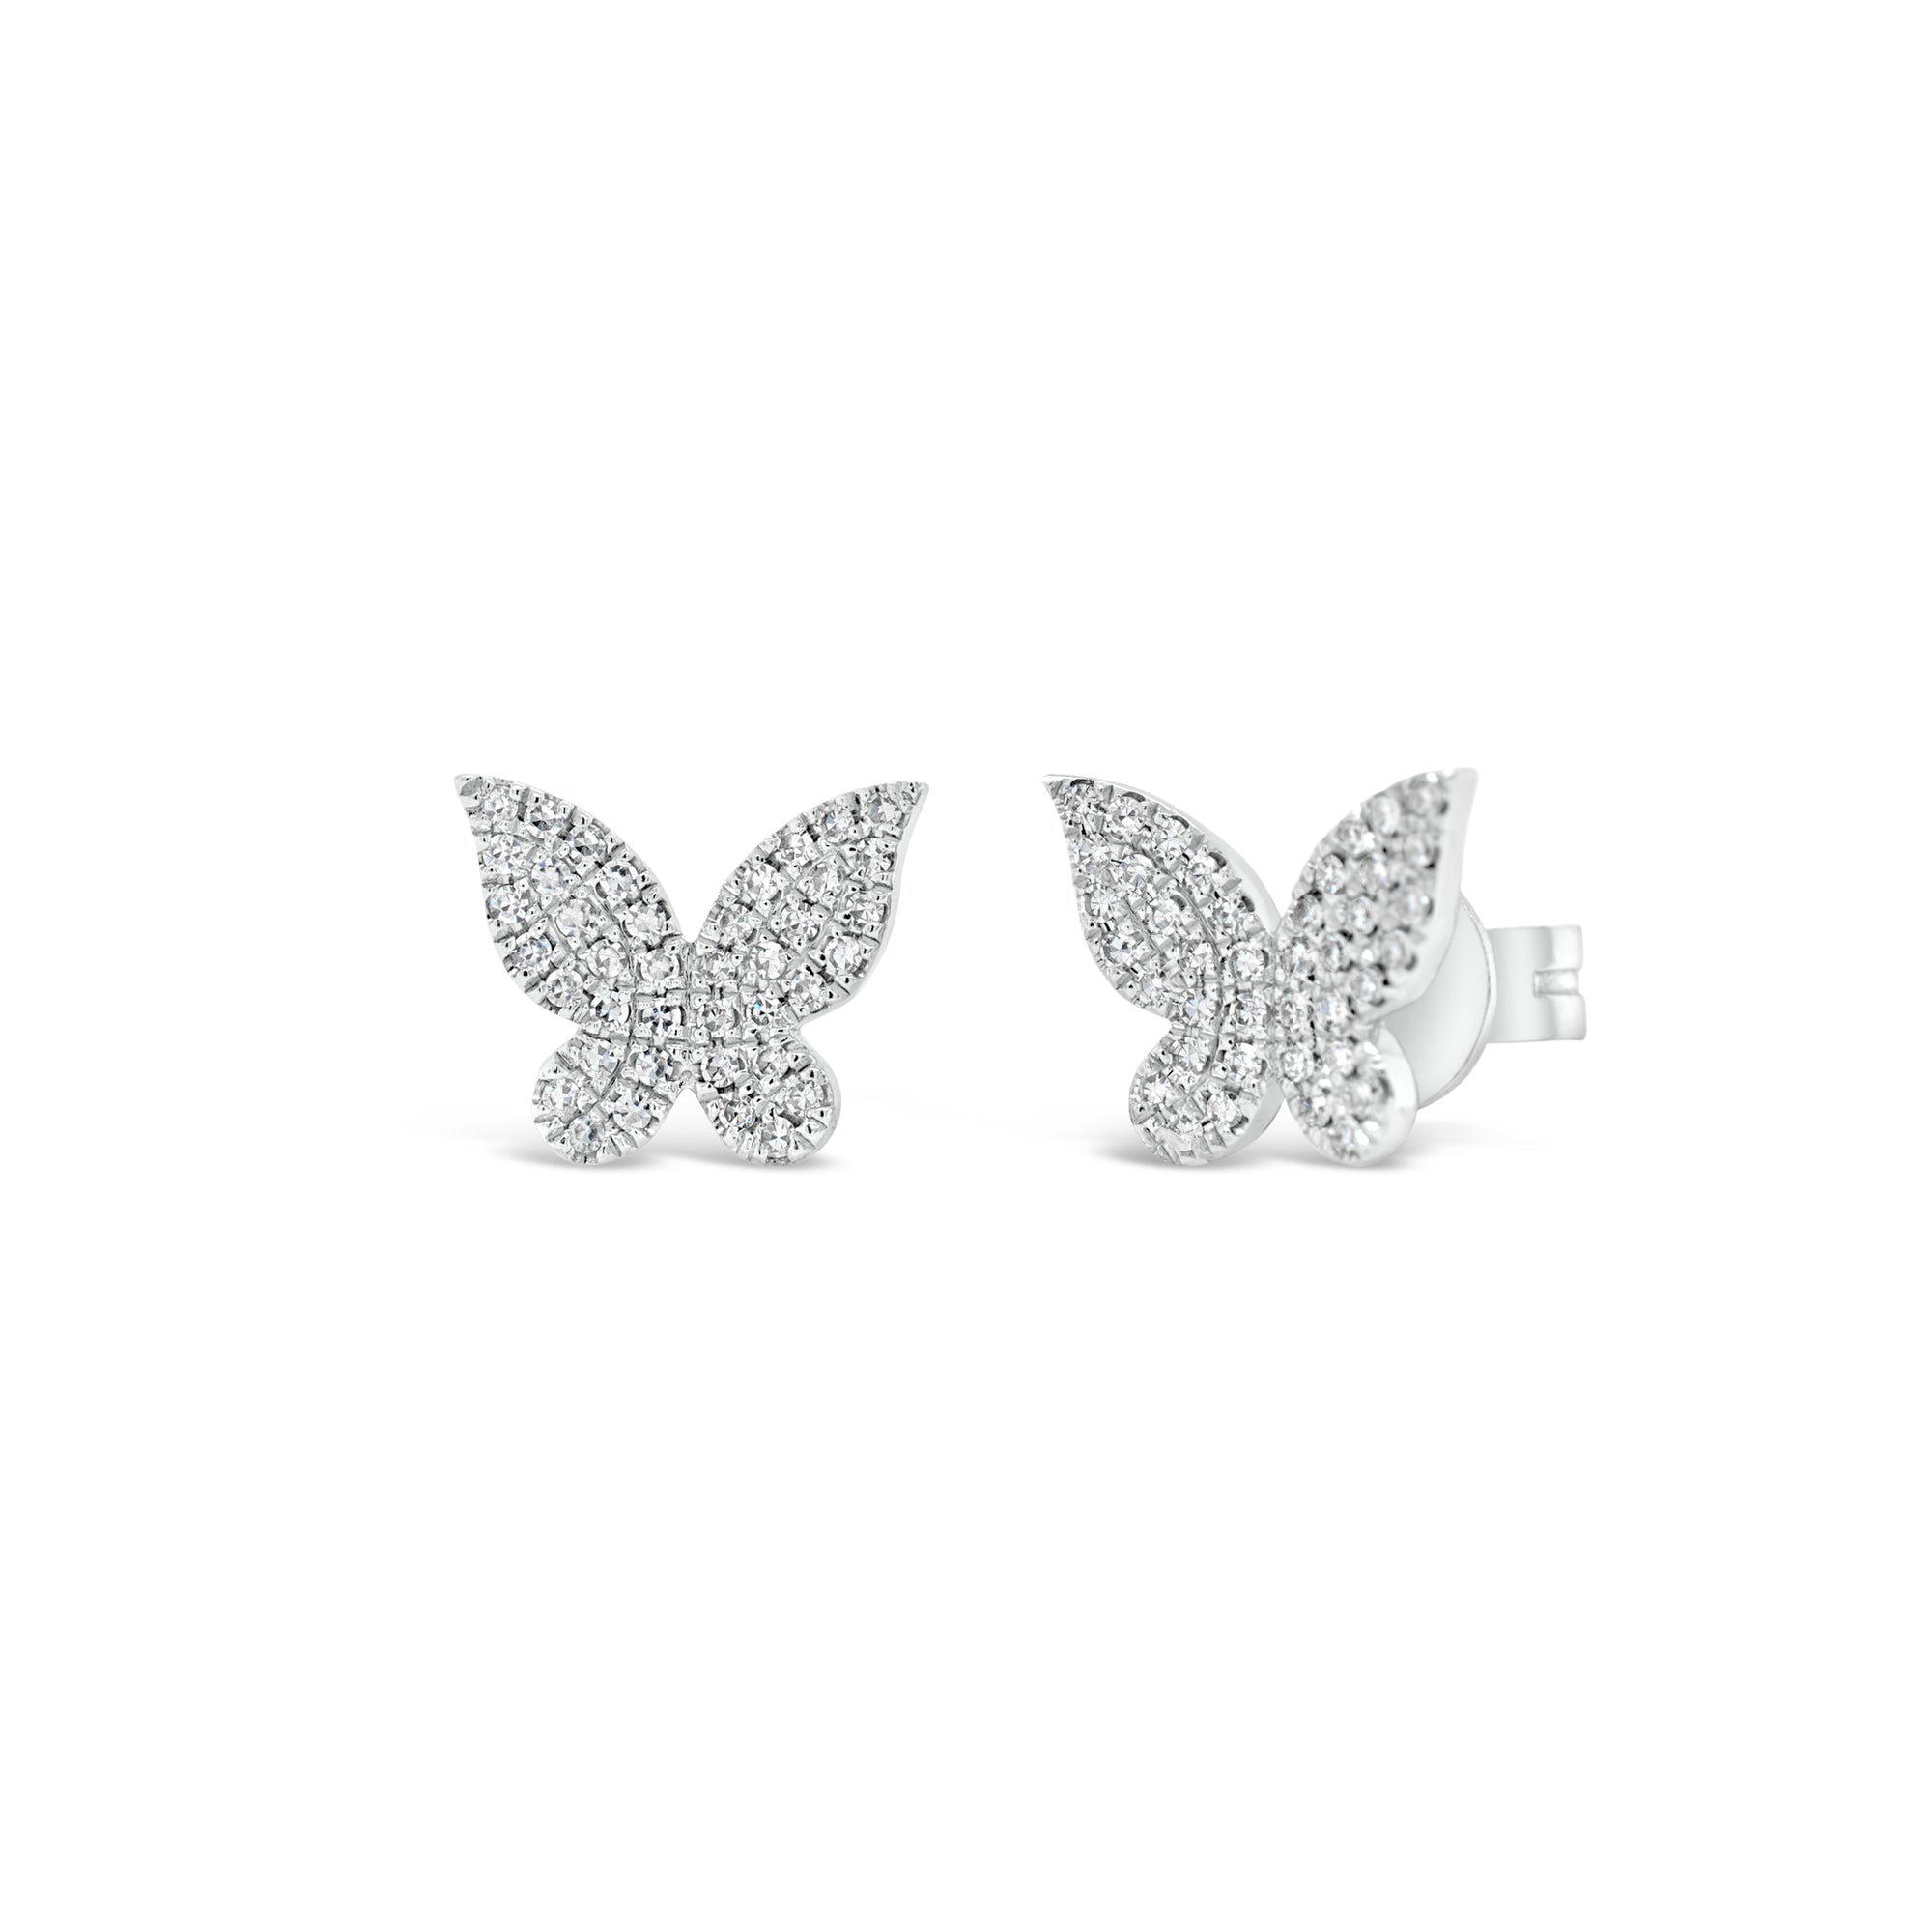 Pave Diamond Butterfly Stud Earrings - 14K white gold weighing 1.12 grams - 72 round diamonds totaling 0.16 carats.